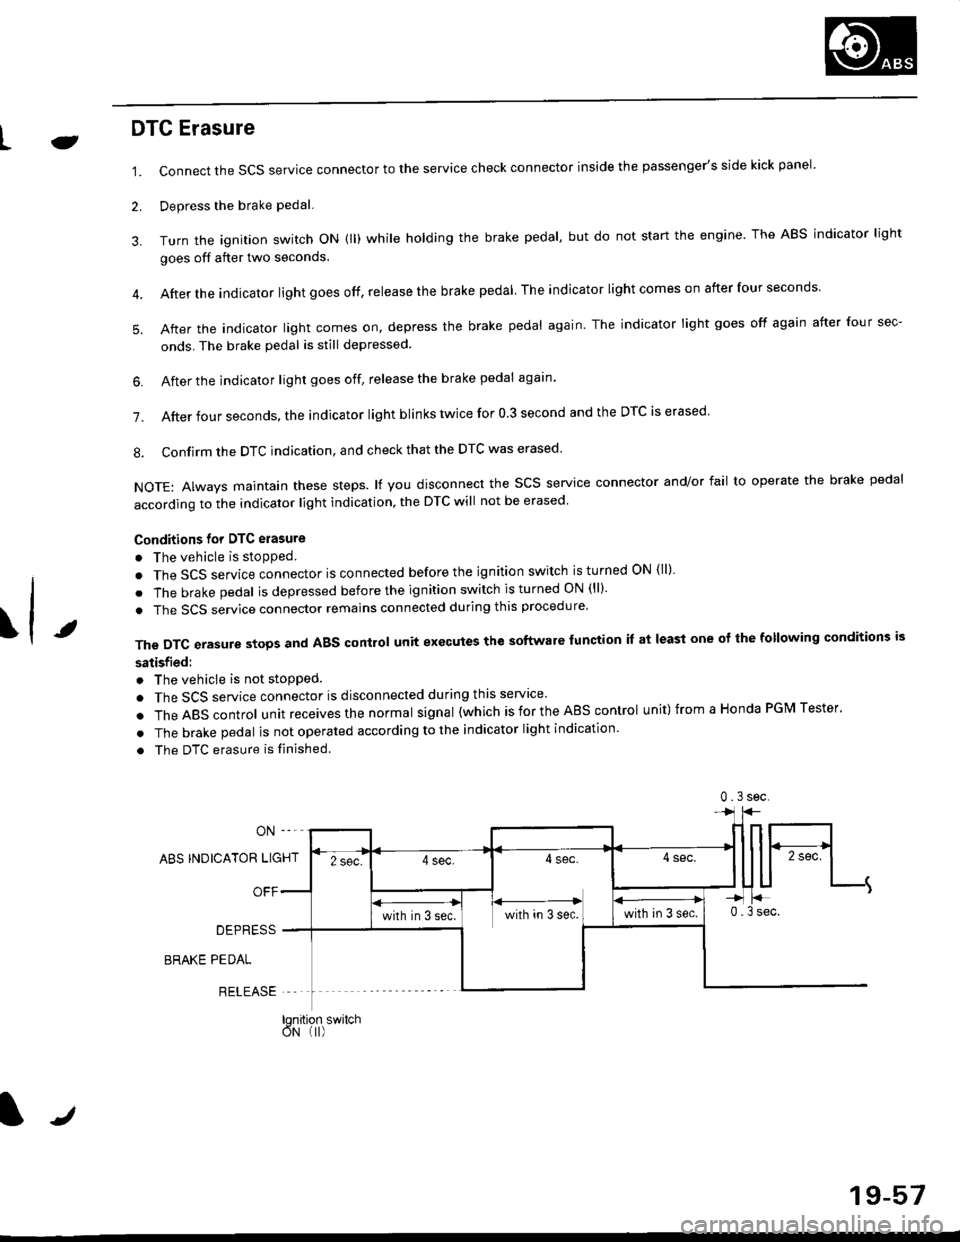 HONDA CIVIC 1996 6.G Owners Guide LJDTG Erasure
1.
2.
Connect the SCS service connector to the service check connector inside the passengers side kick panel.
Depress the brake pedal.
Turn the ignition switch oN (ll) while holding the